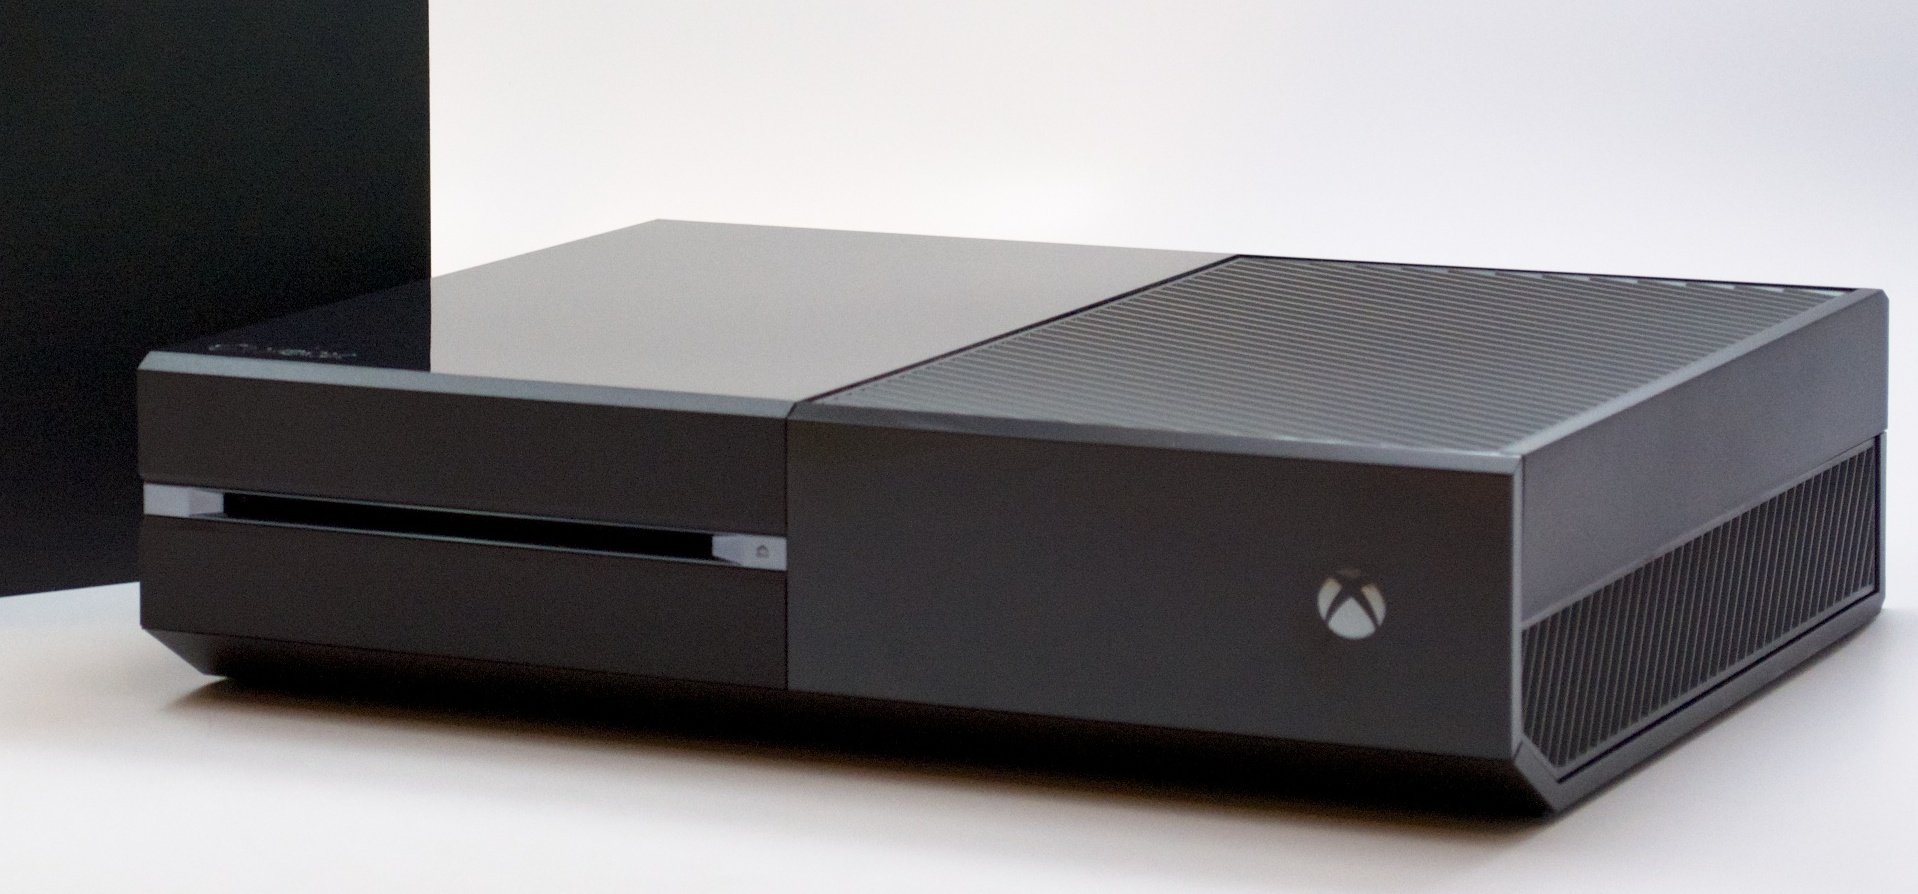 Xbox One Deals arrive with savings on accessories, the Xbox One and Halo for Xbox One.